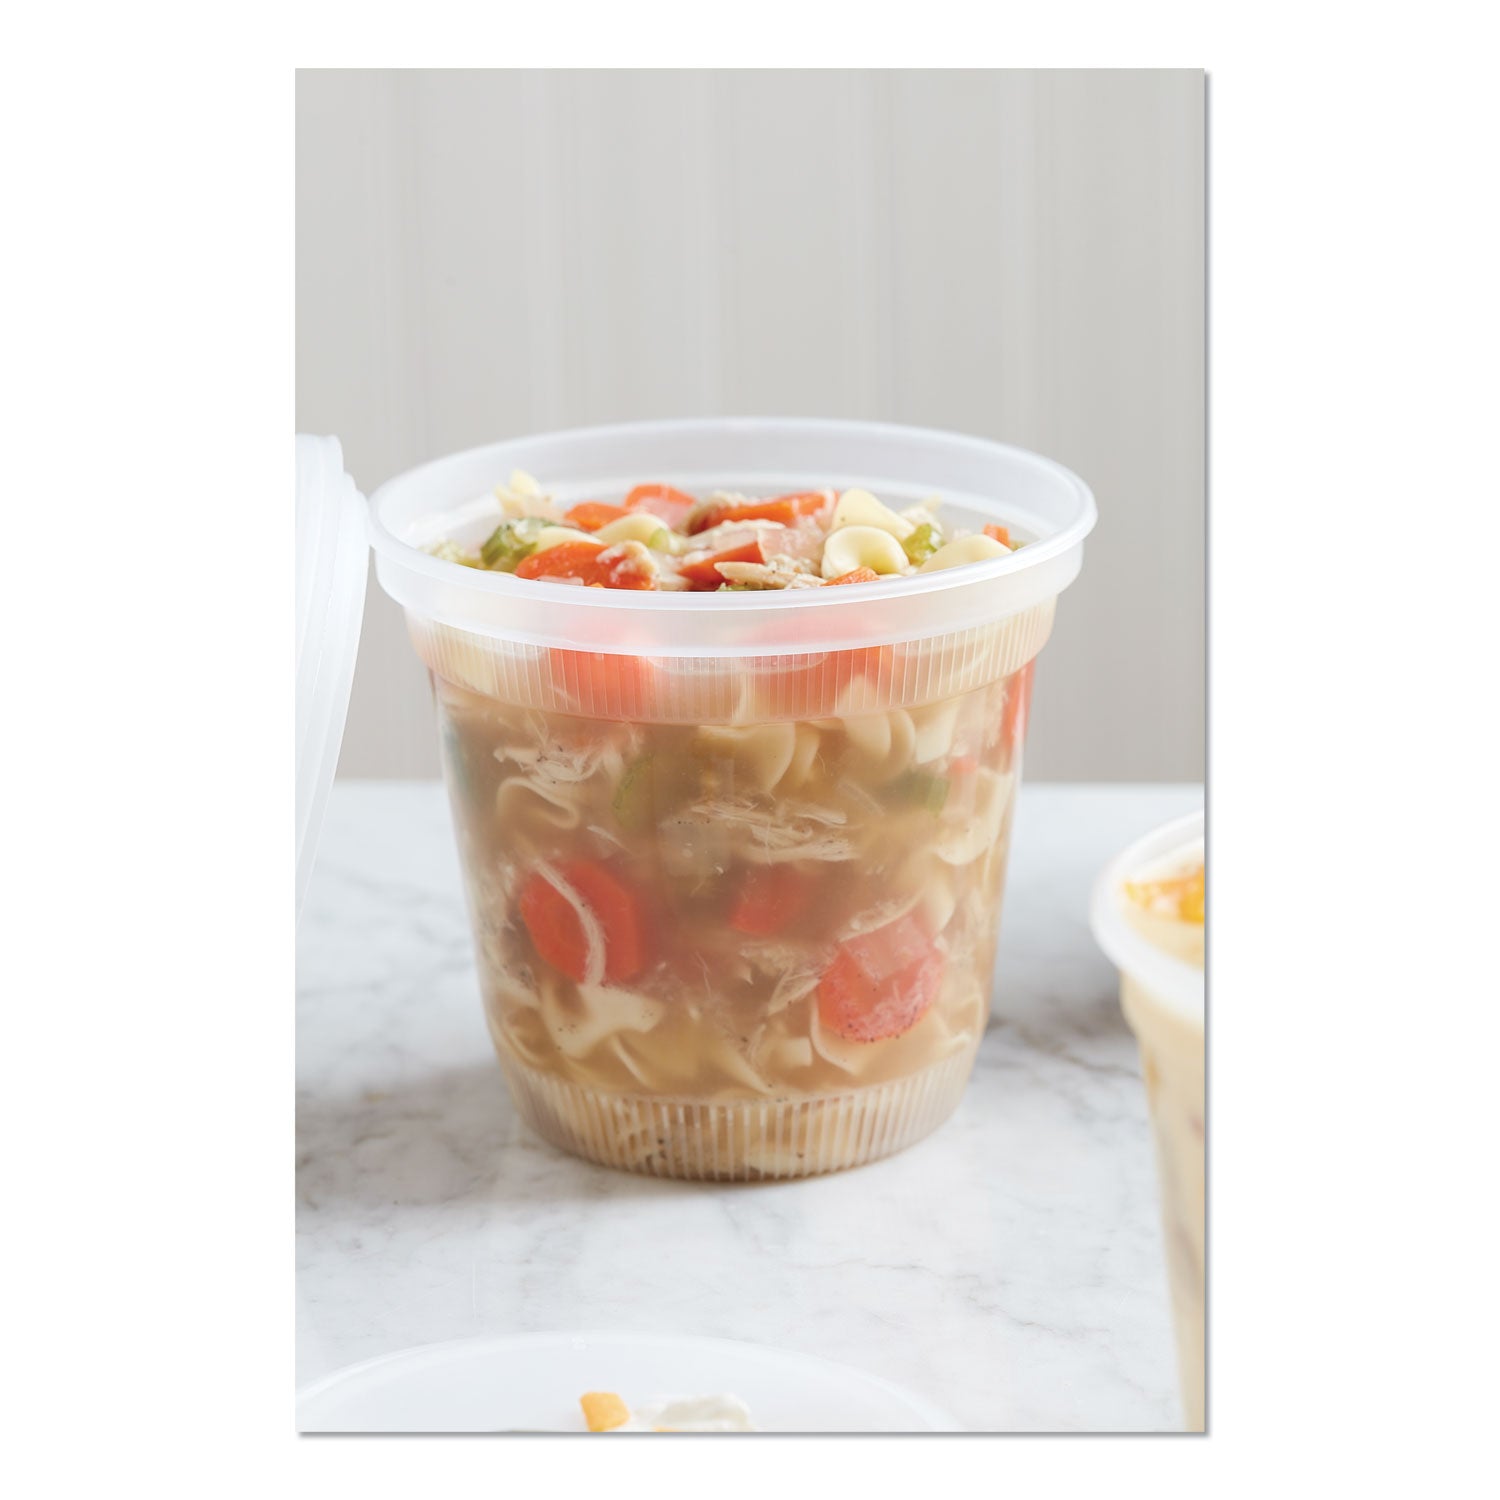 newspring-delitainer-microwavable-container-32-oz-55-x-55-x-49-clear-plastic-200-carton_pctl8328 - 2